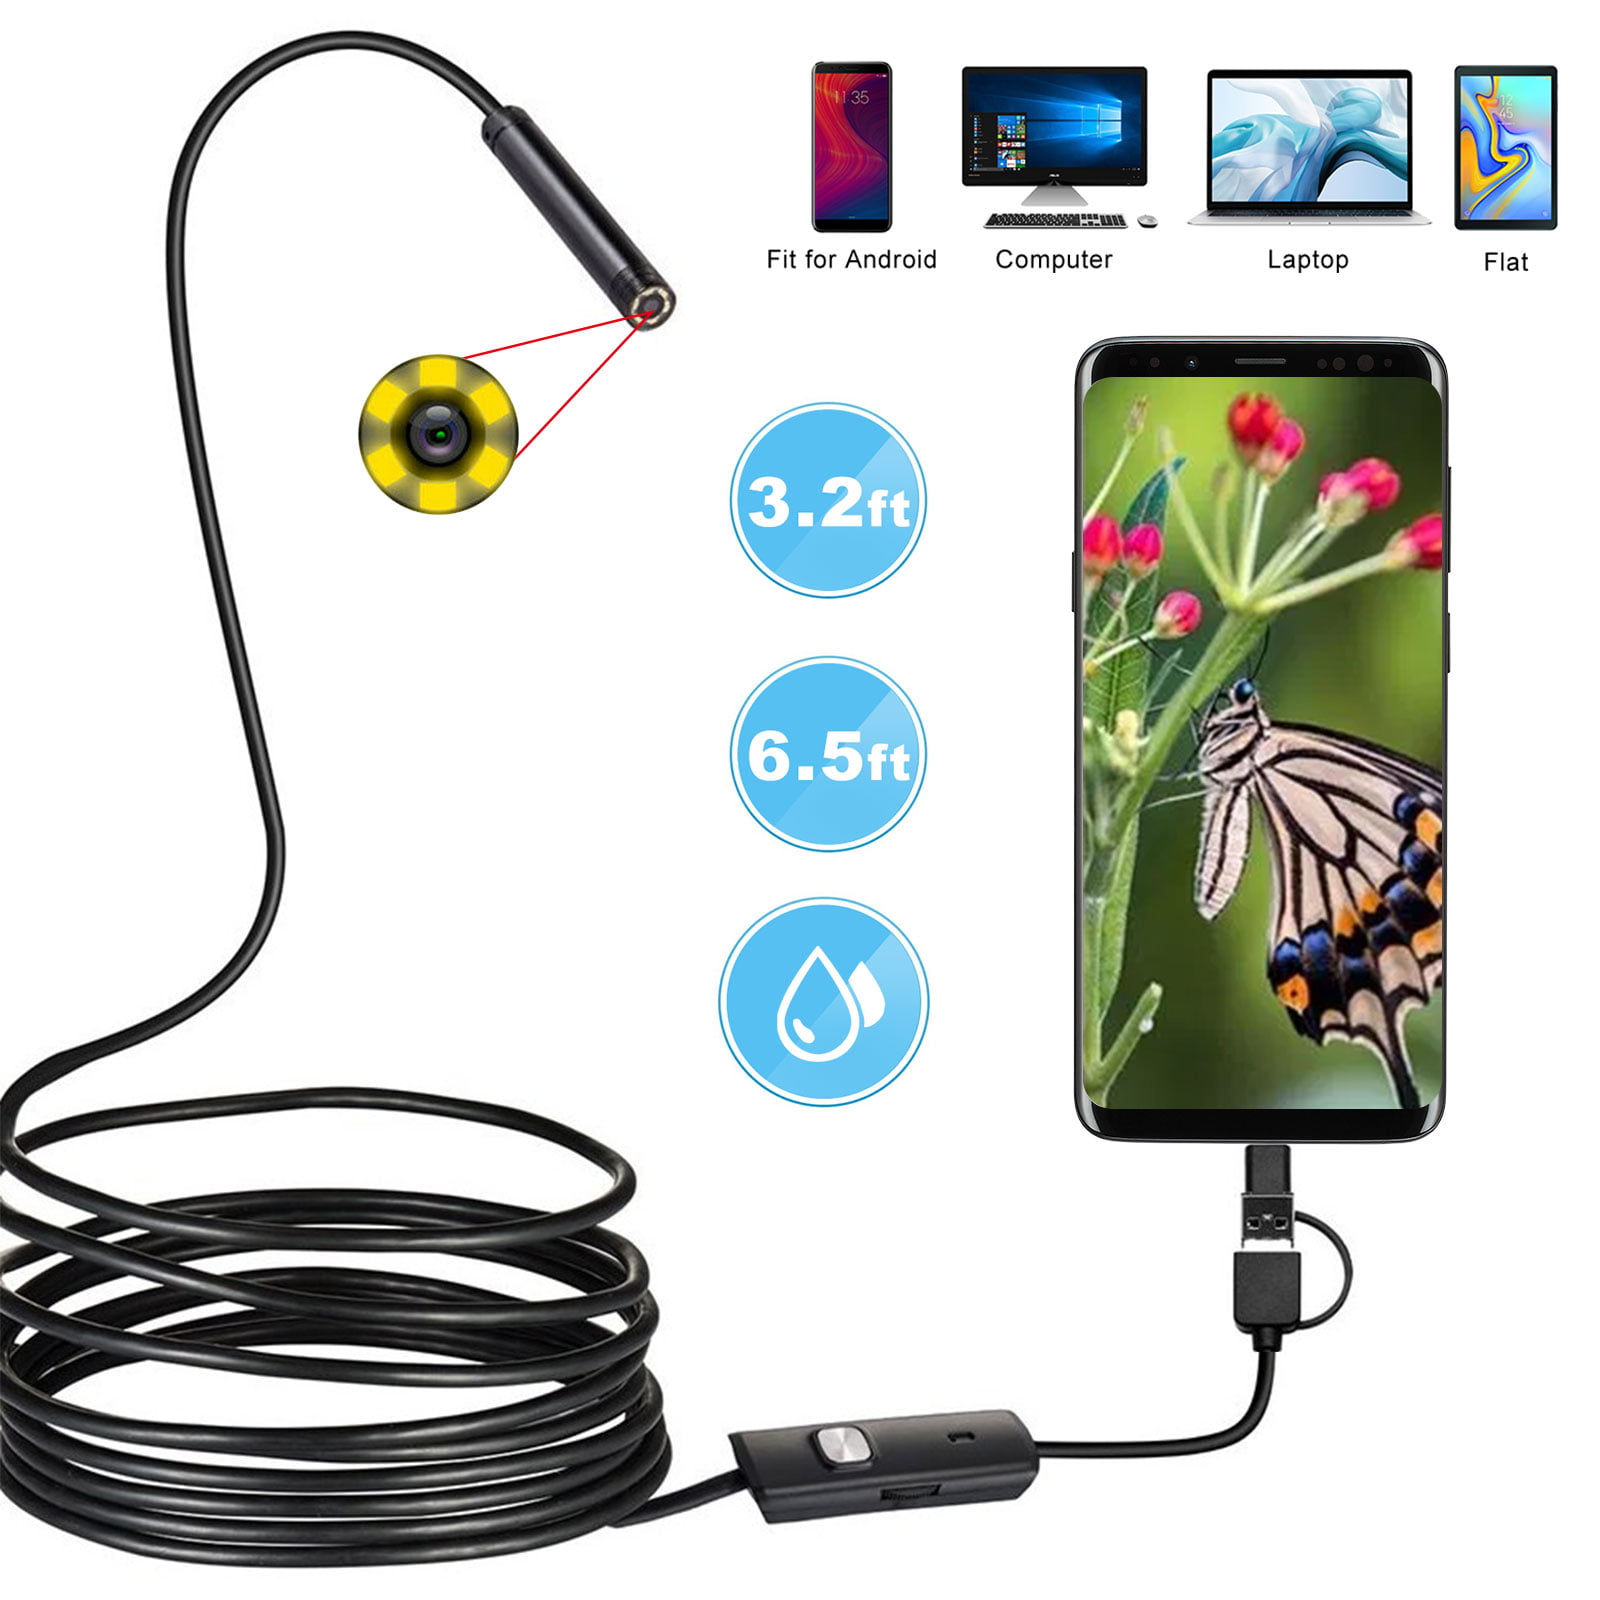 USB Inspection Endoscope Camera 2.0 MP HD 3 in 1 Borescope USB/Micro USB/Type-C Adjustable 8 LED Lights for Android Smartphone and Windows Devices 